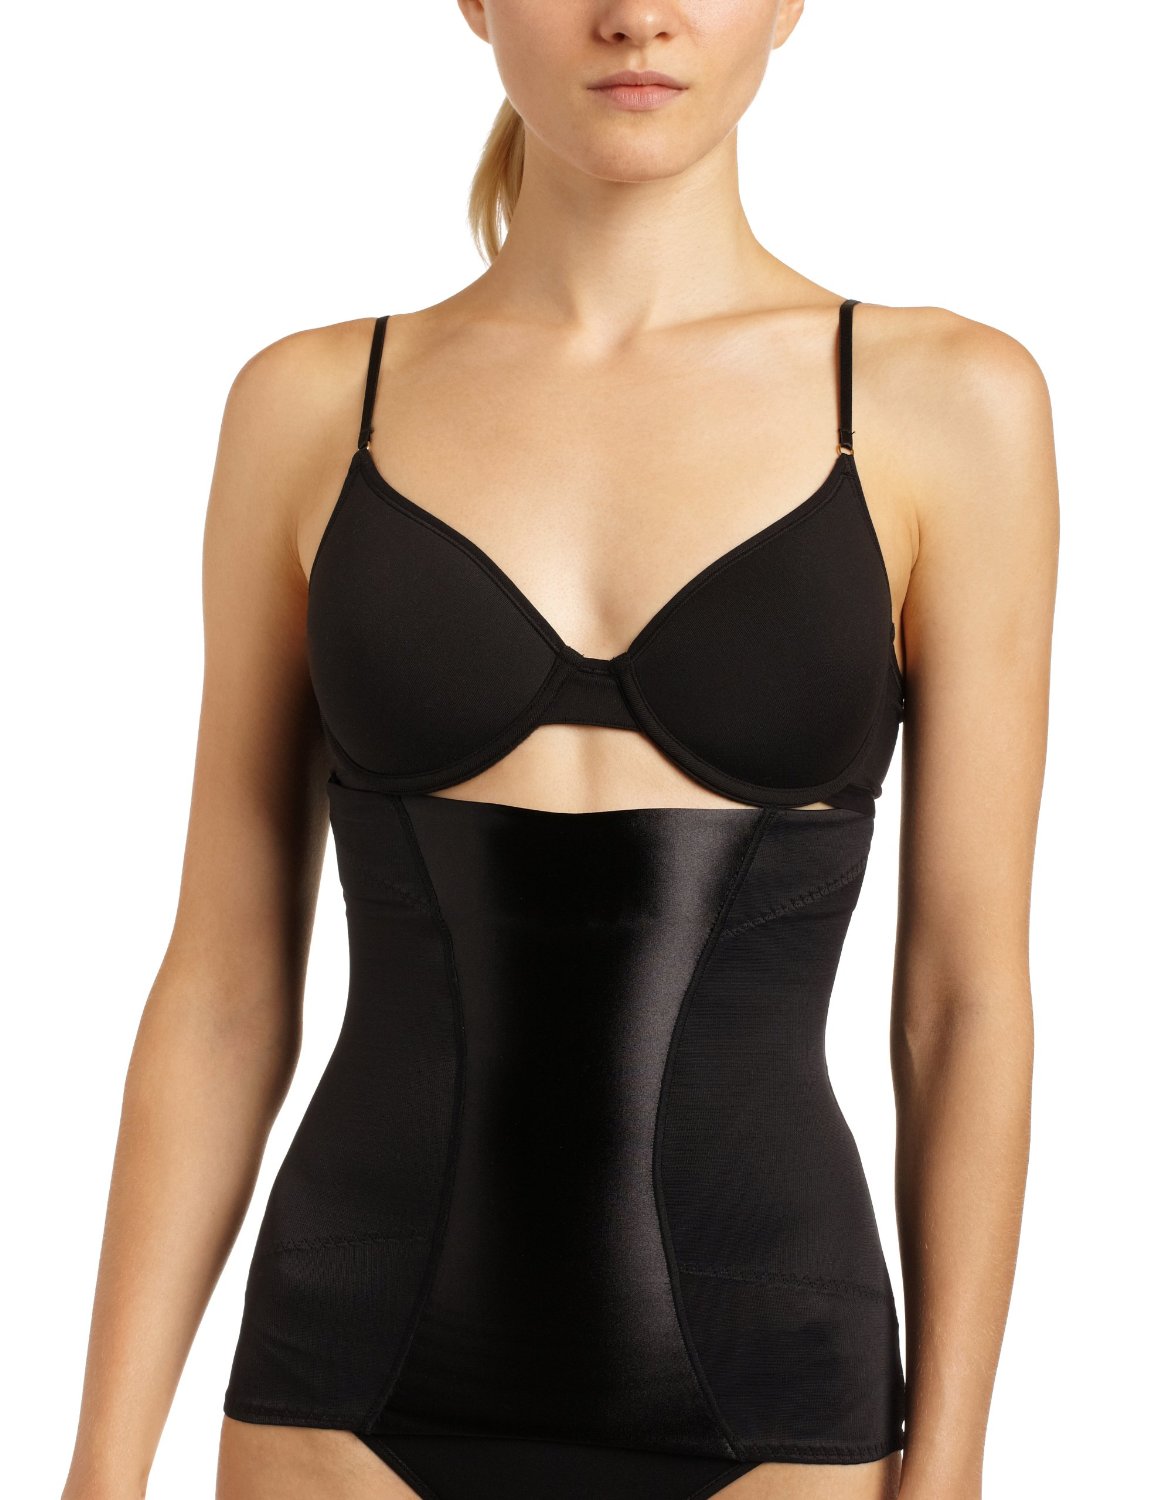 Flexees shapewear – independent review